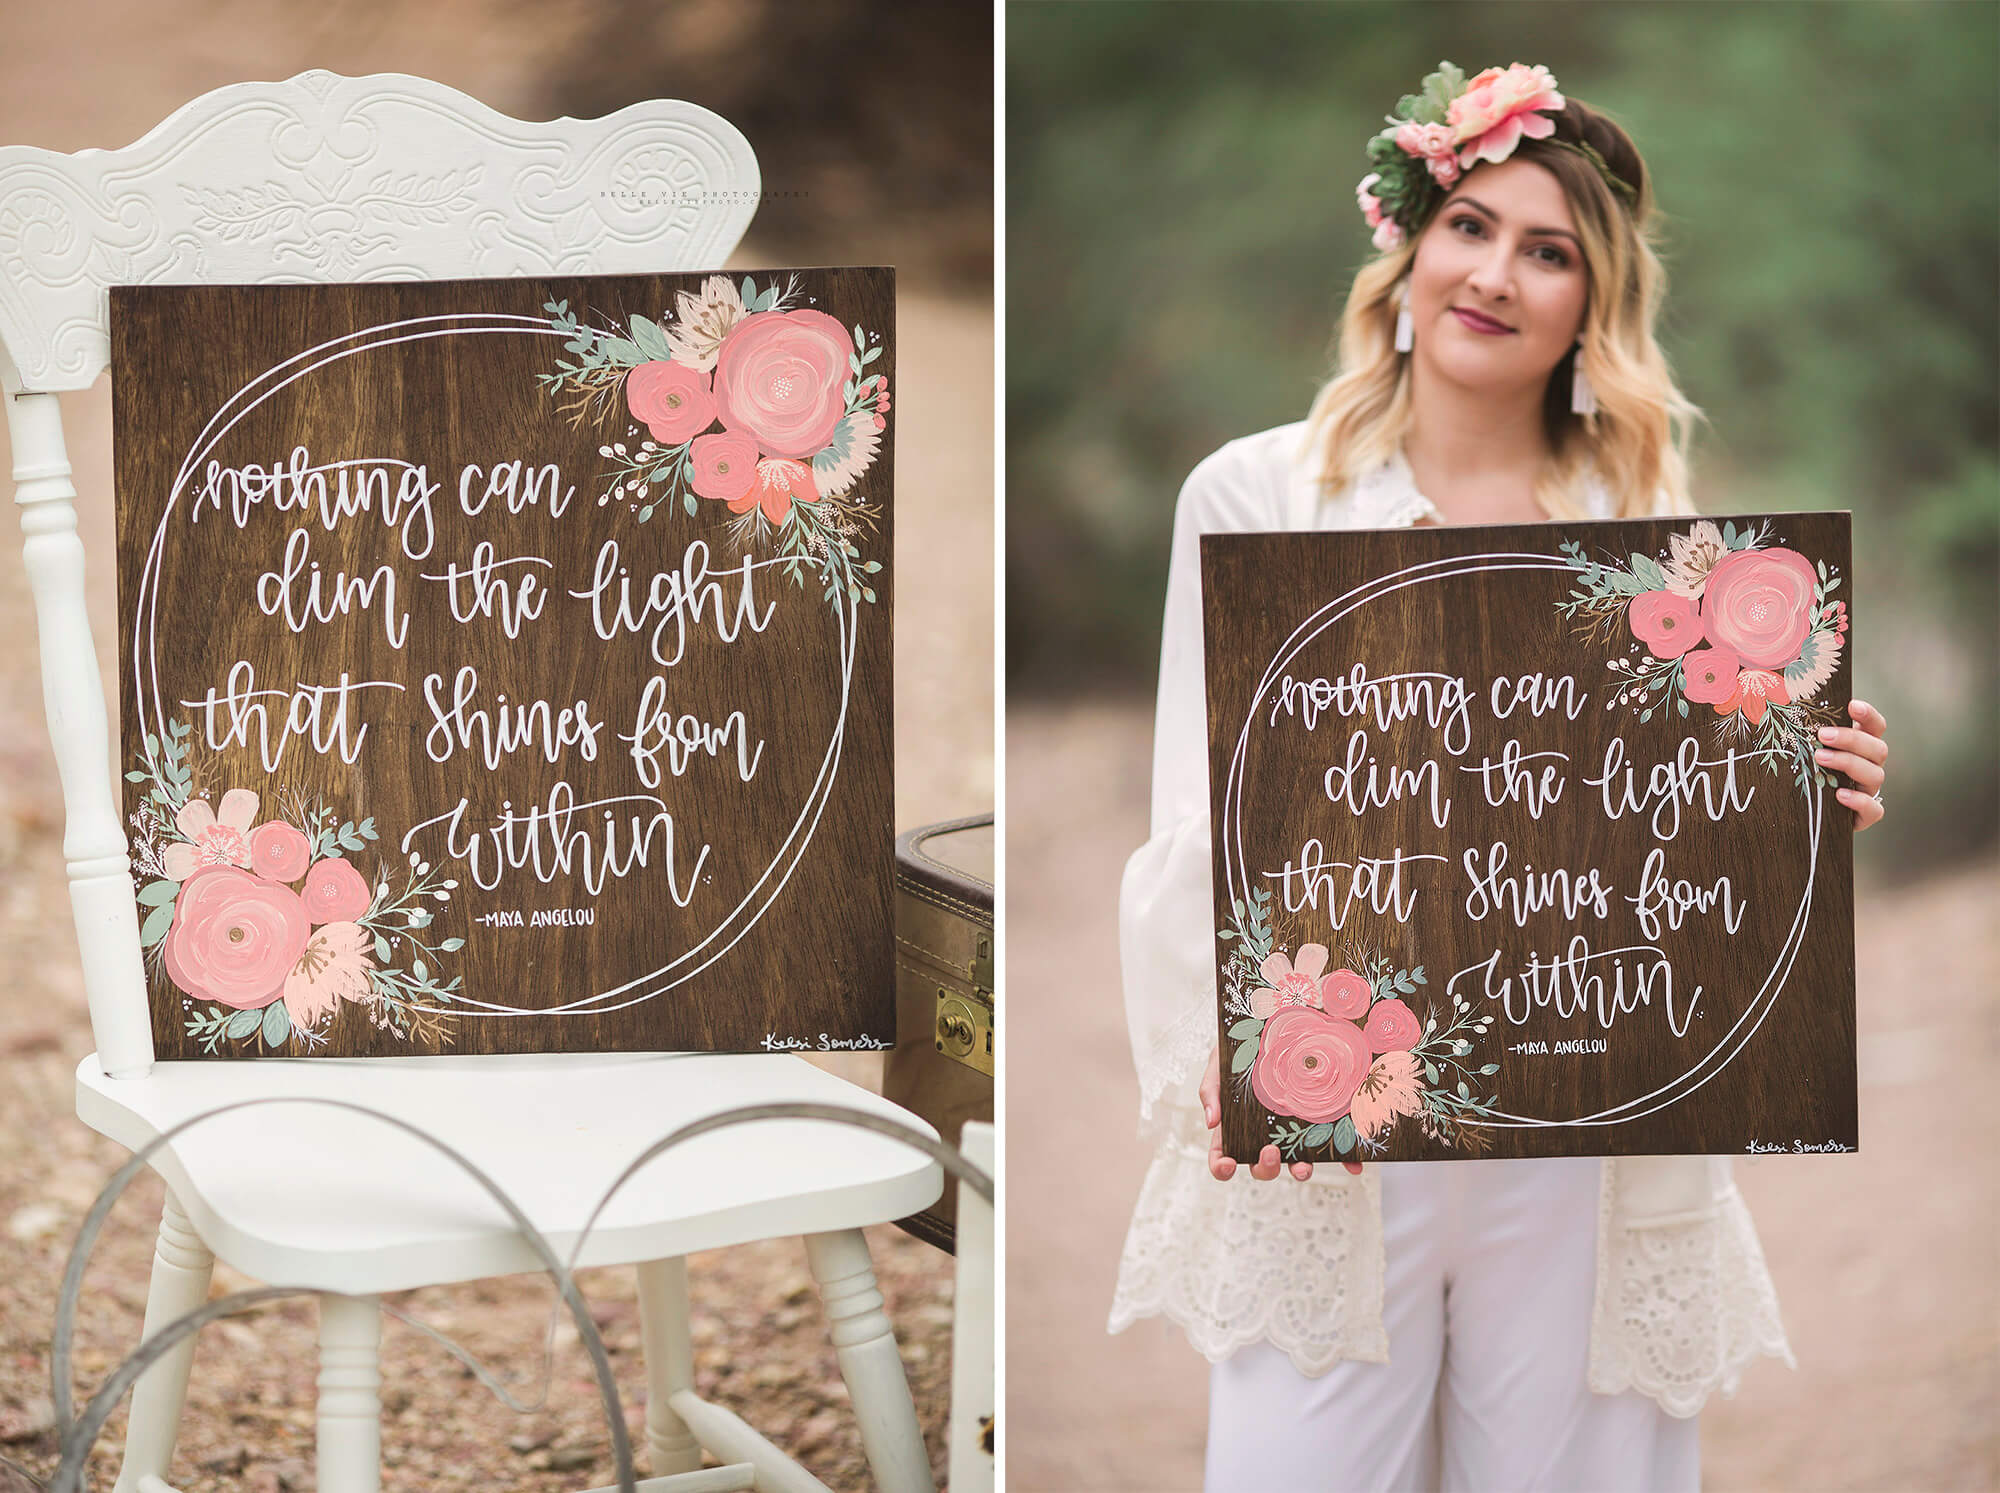 Beautiful hand-lettered sign by Kelsi Somers, owner of Selah and Bloom in Tucson with the quote, "Nothing can dim the light that shines from within," by Maya Angelou